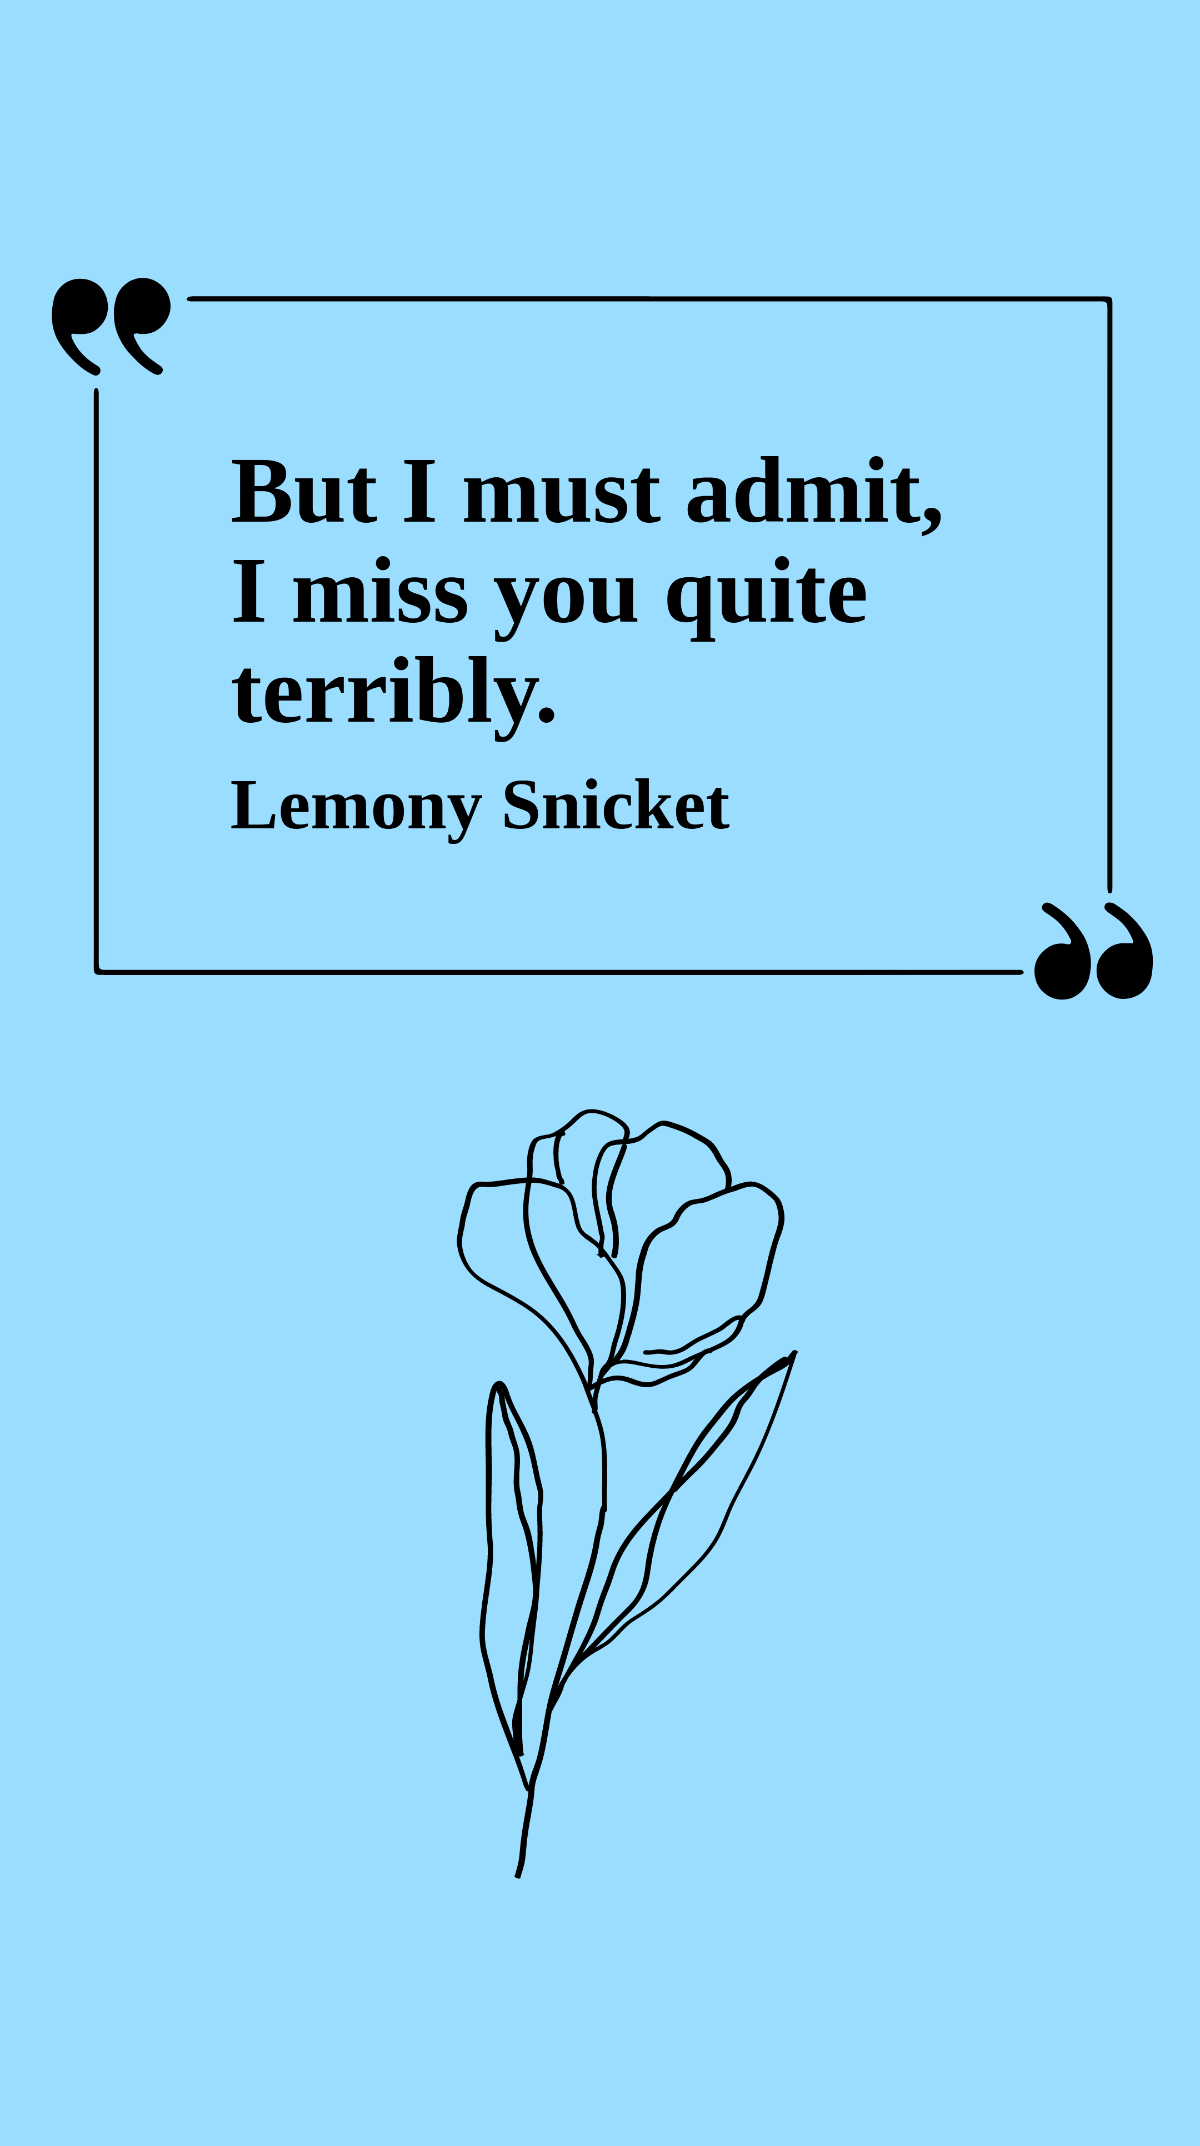 Free Lemony Snicket, The Beatrice Letters - But I must admit, I miss you quite terribly. Template